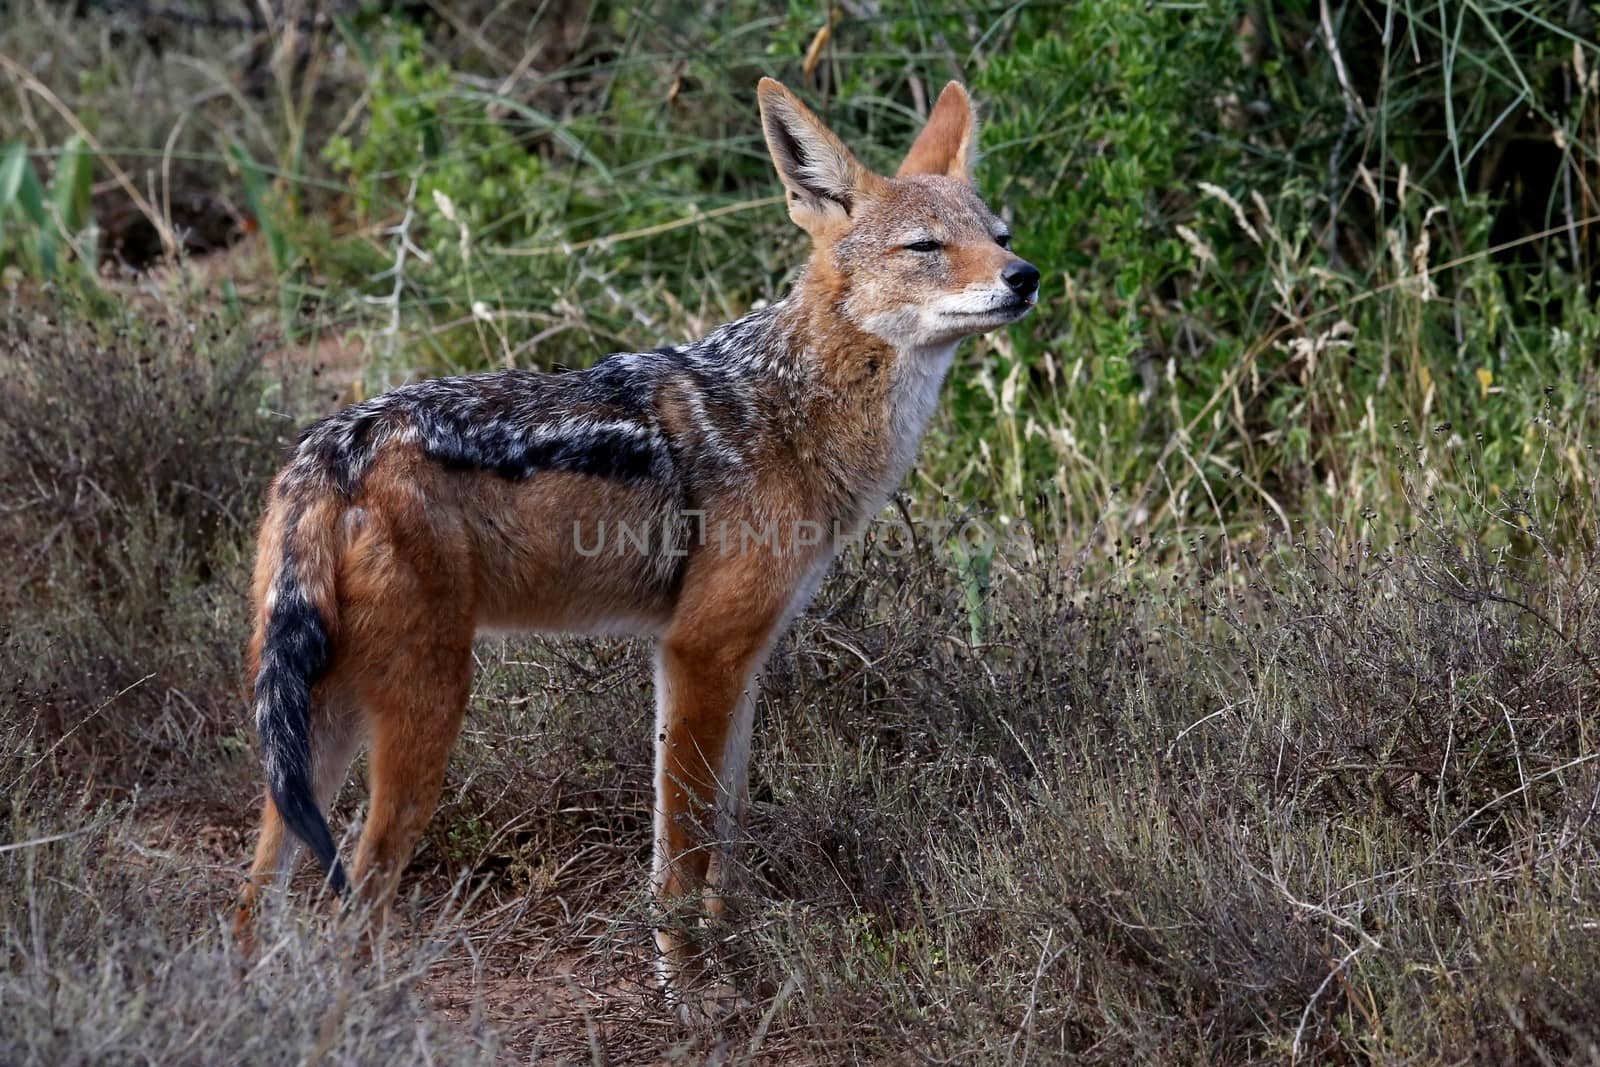 Portrait of a Black Backed Jackal with large ears